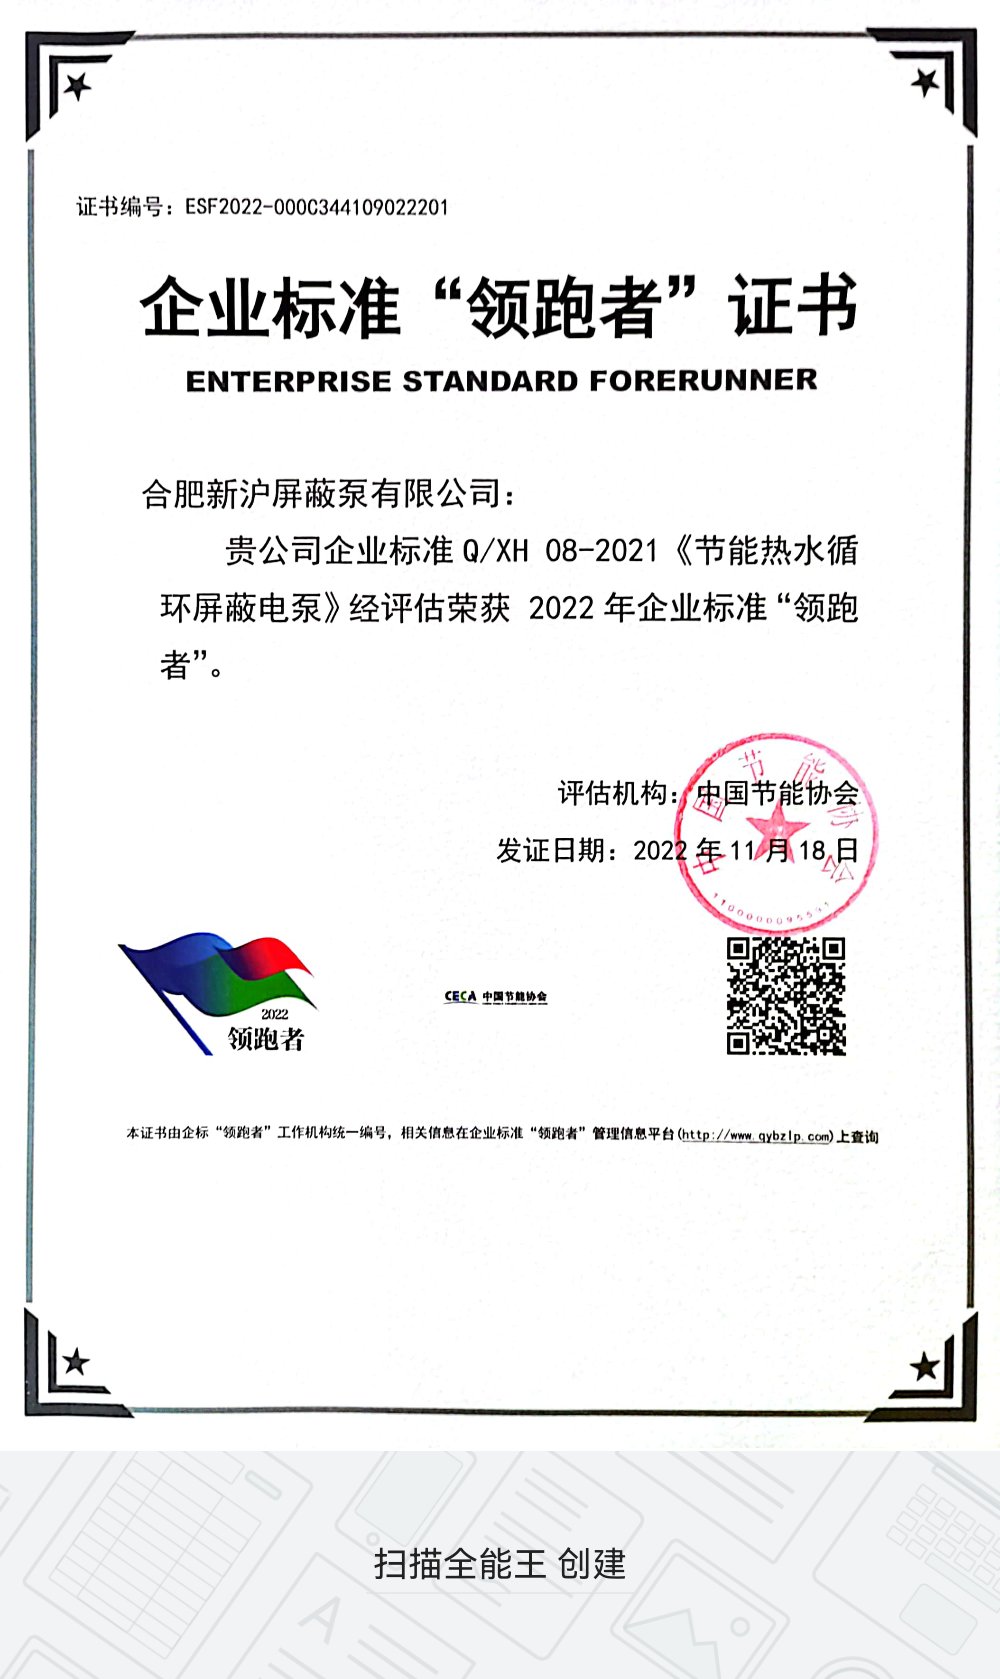 The Enterprise Standard of Shinhoo was selected into the list of “forerunner “in 2021